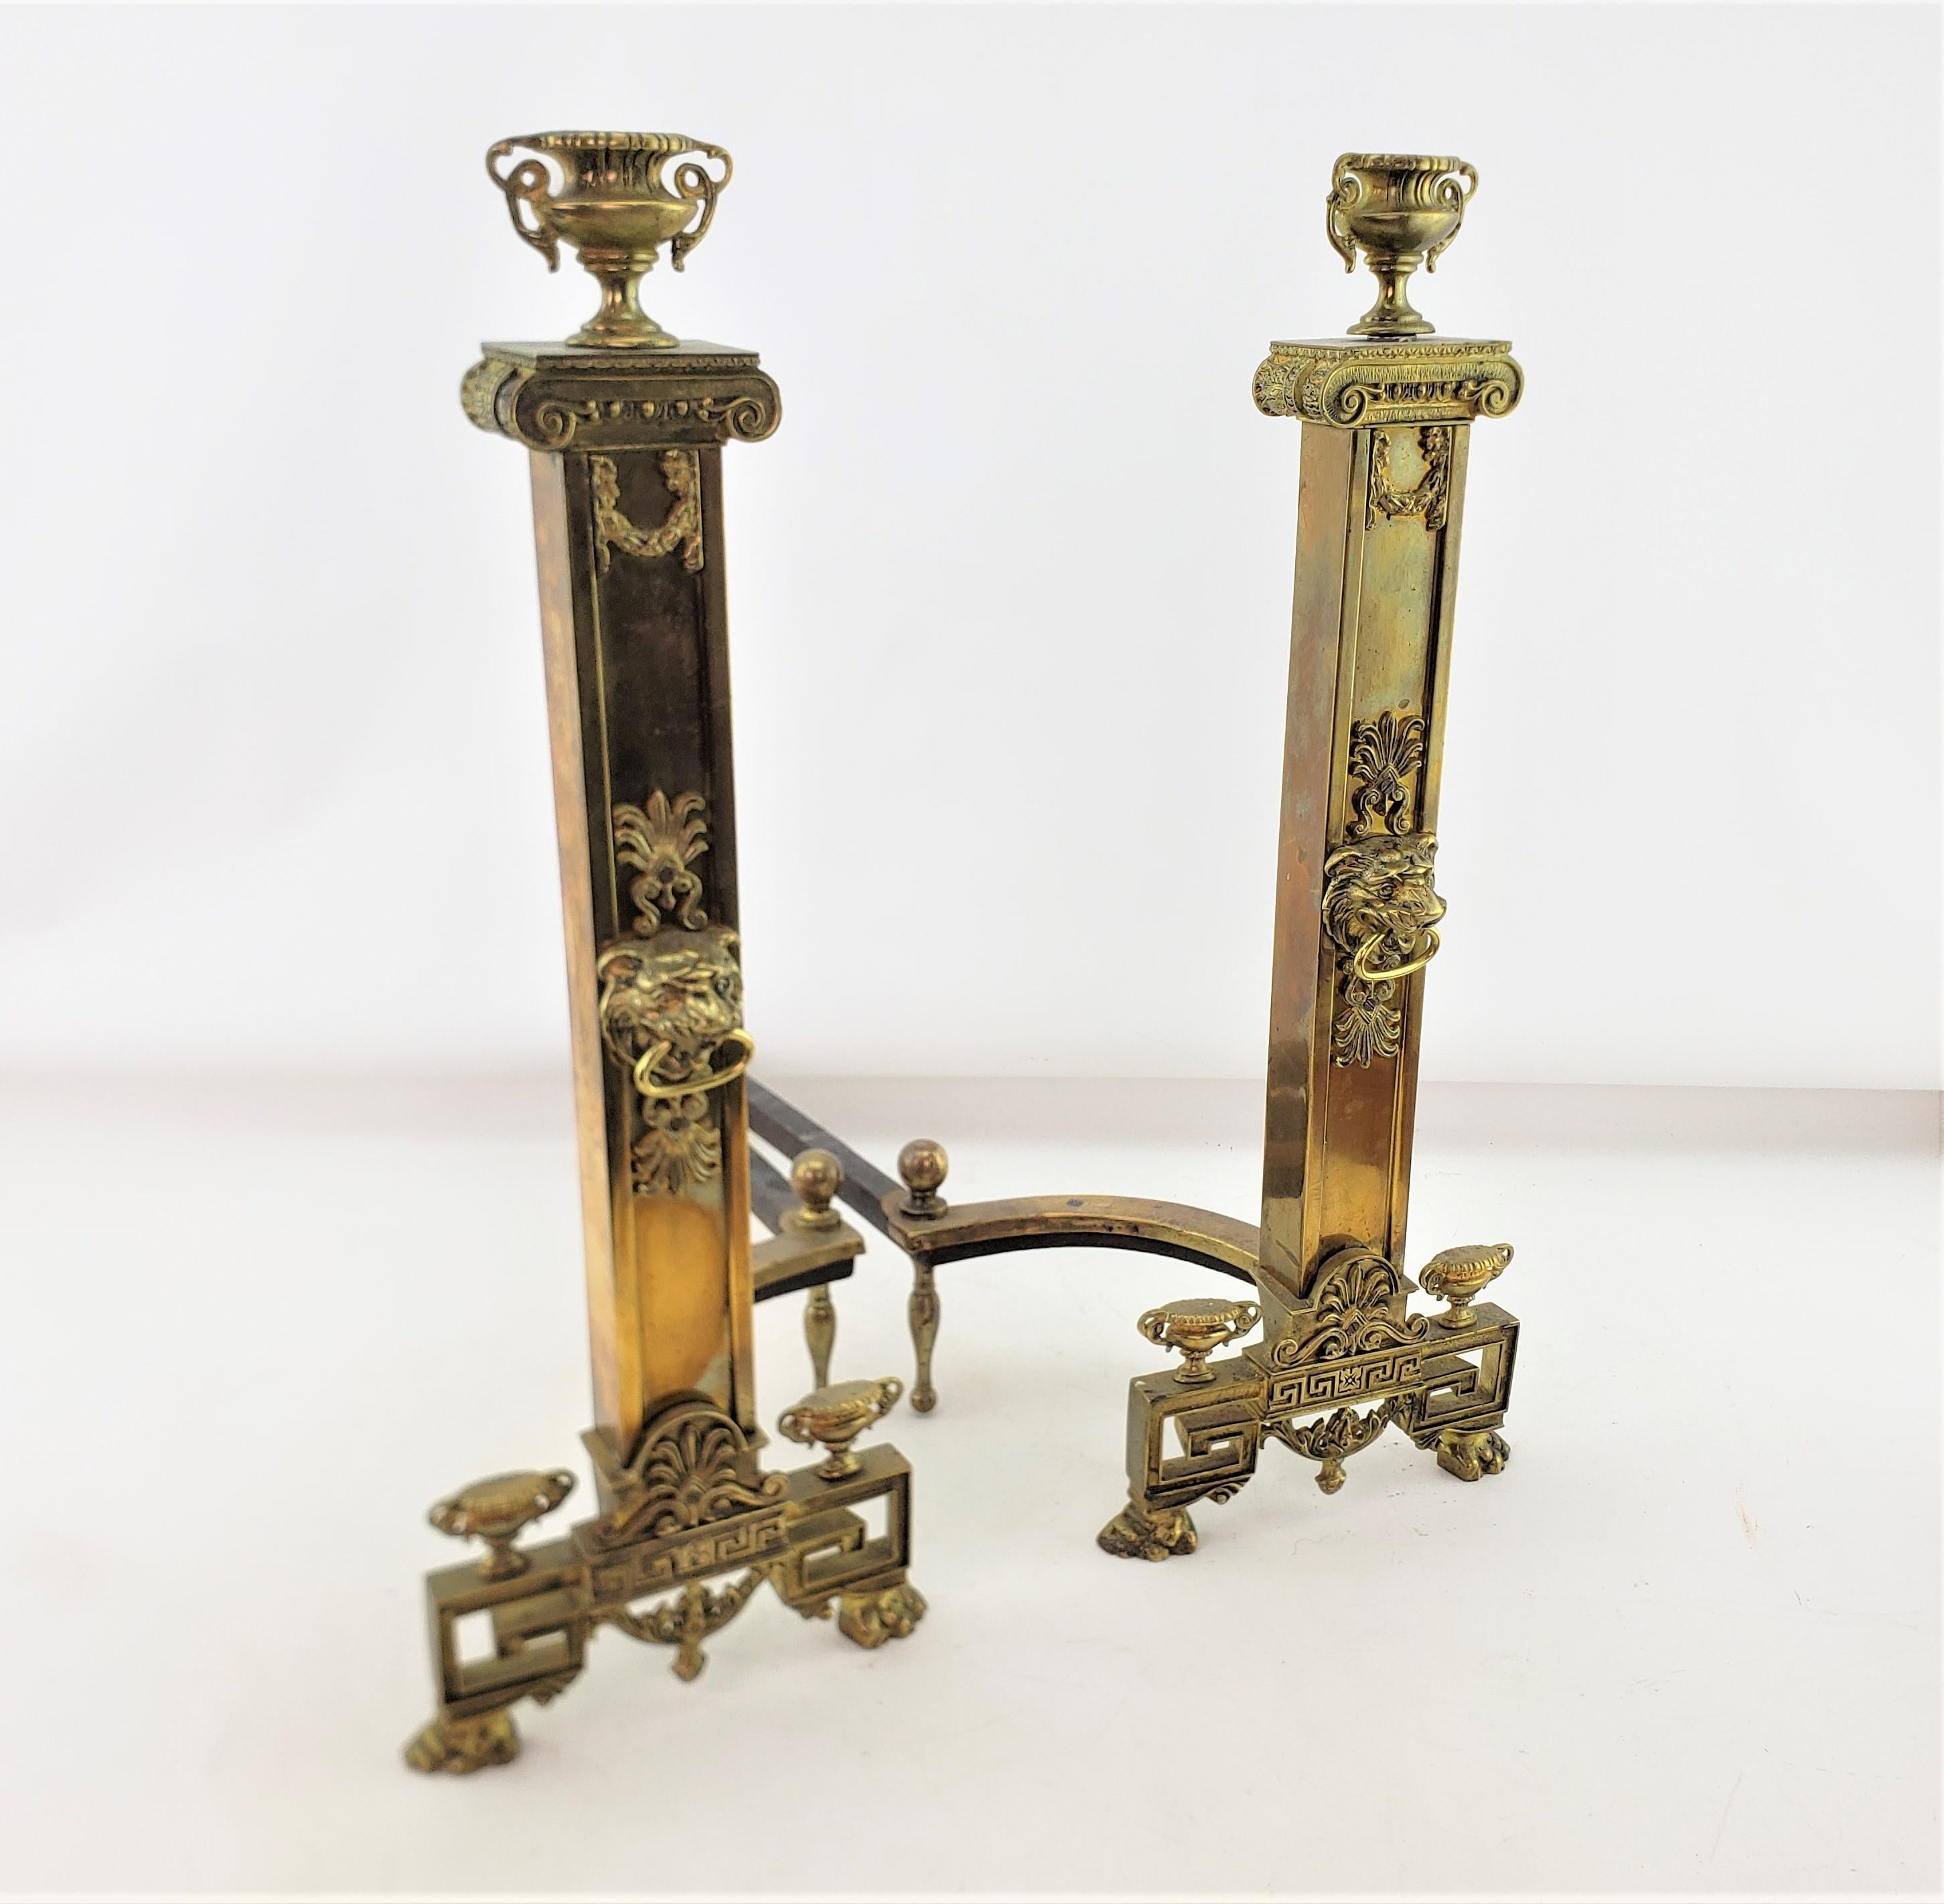 This pair of antique andirons are unsigned, but presumed to have originated from the United States and date to approximately 1900 and done in a Neoclassical Revival style. The andirons are composed of a cast and polished brass with cast iron